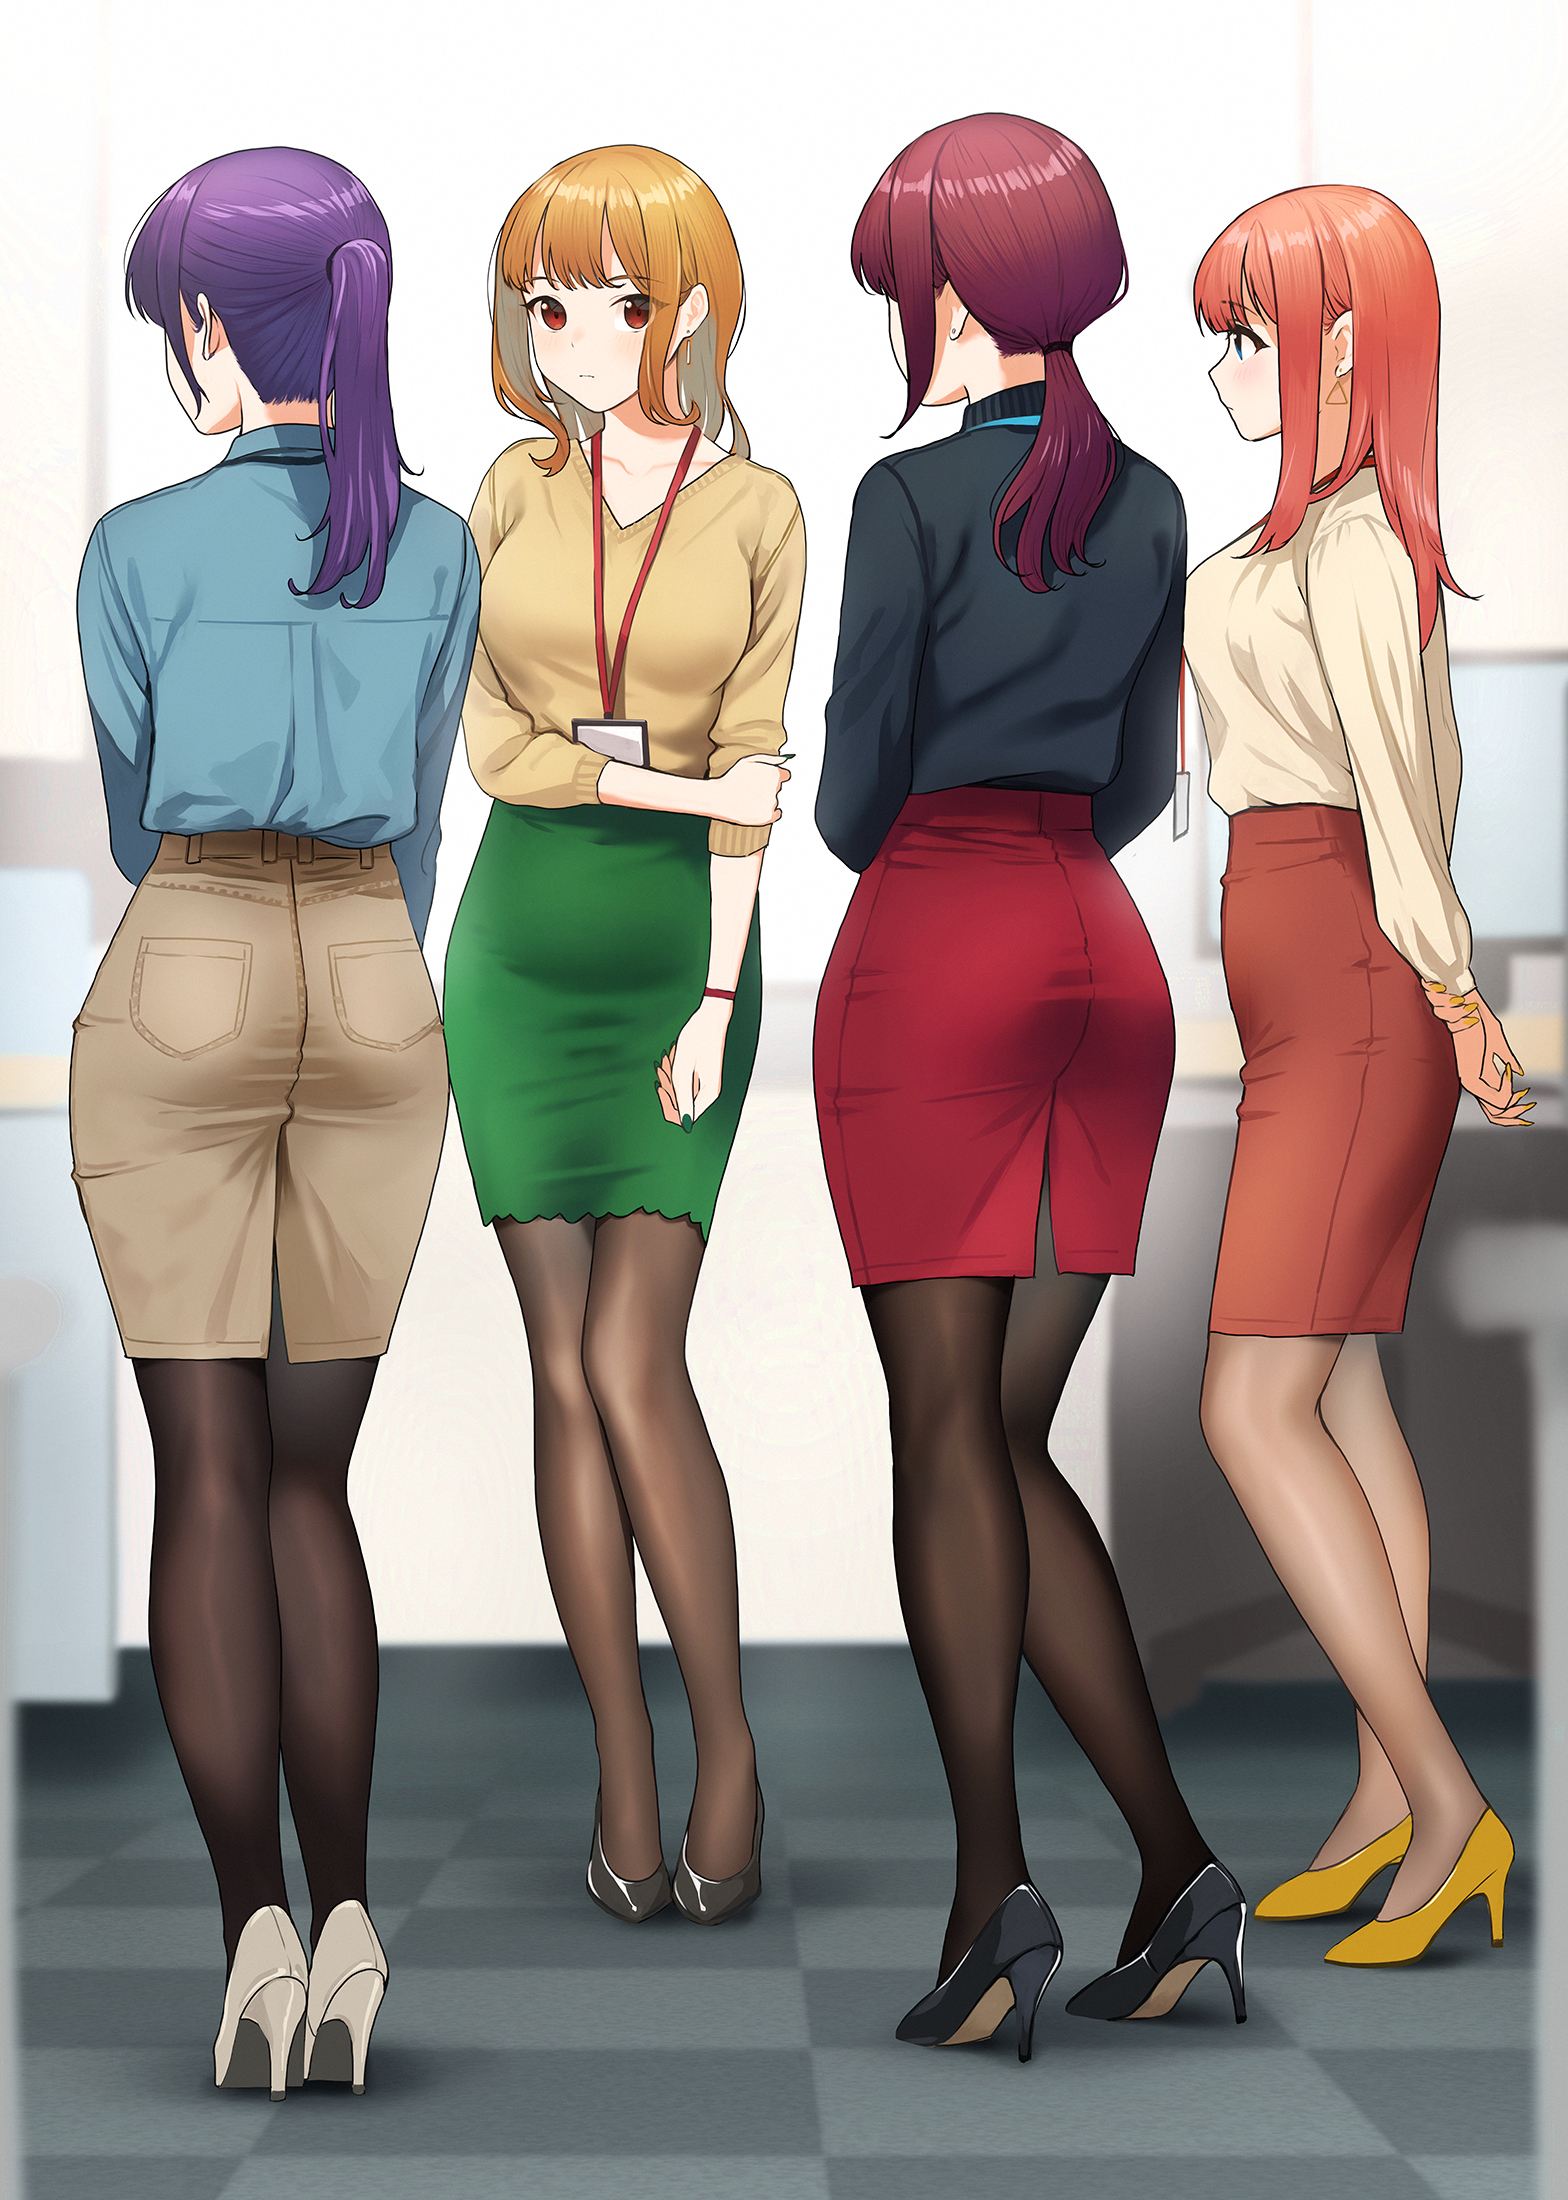 Before the glider - Drawing, Office, Office workers, Girls, Expectation, Doshimash0, Anime art, Art